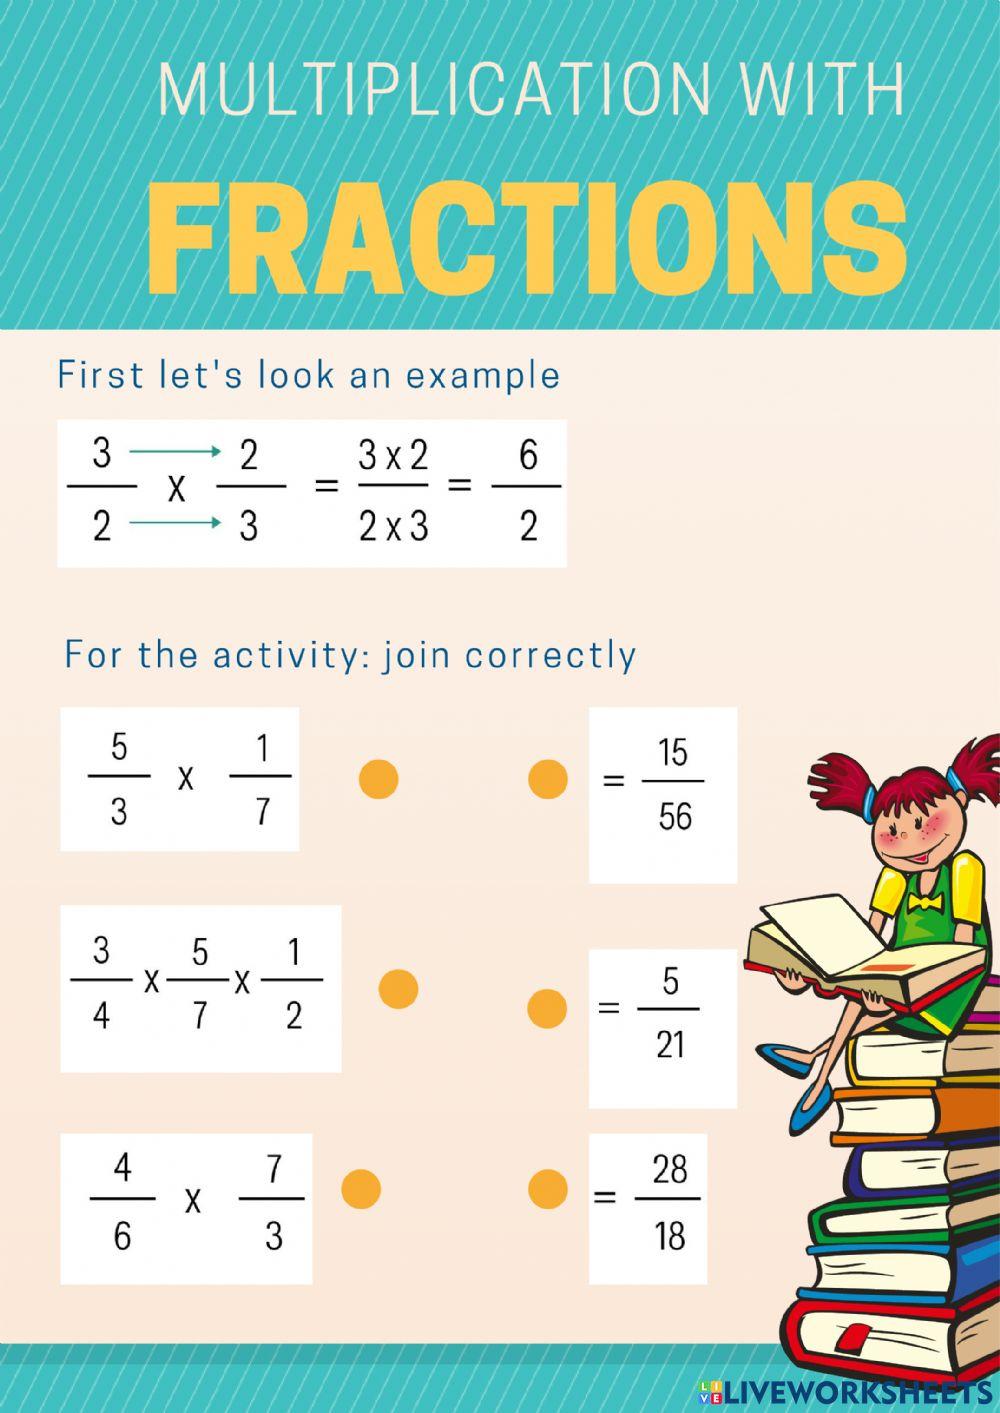 Multiplication with fractions